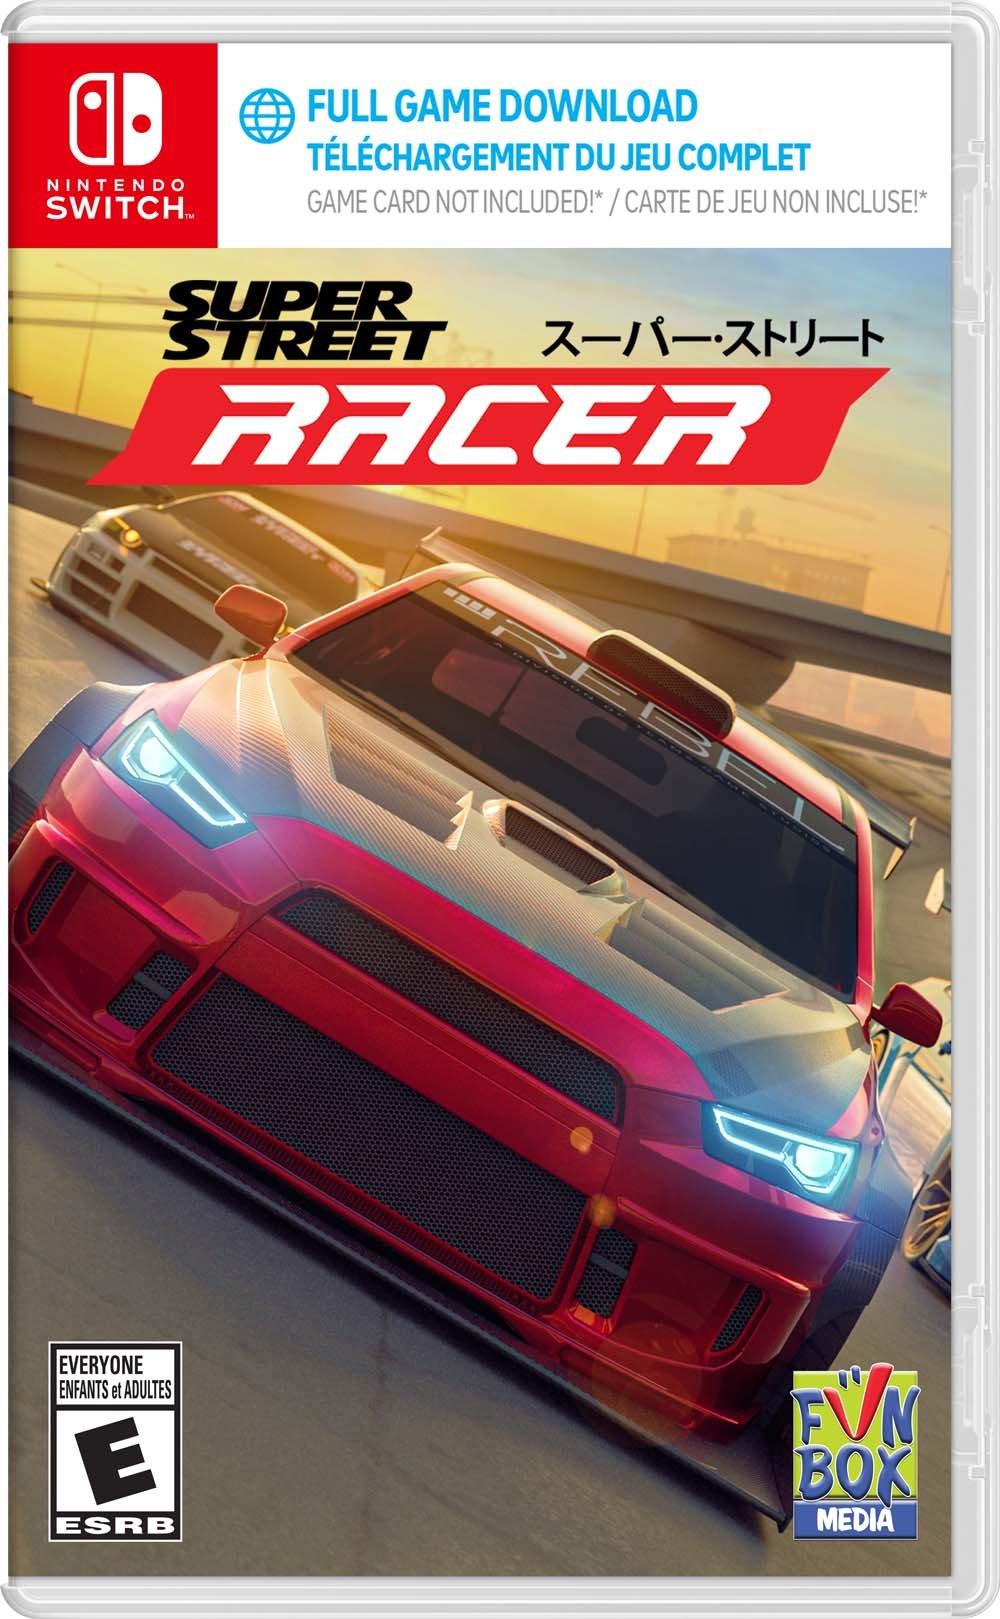 Speed Crew for Nintendo Switch - Nintendo Official Site